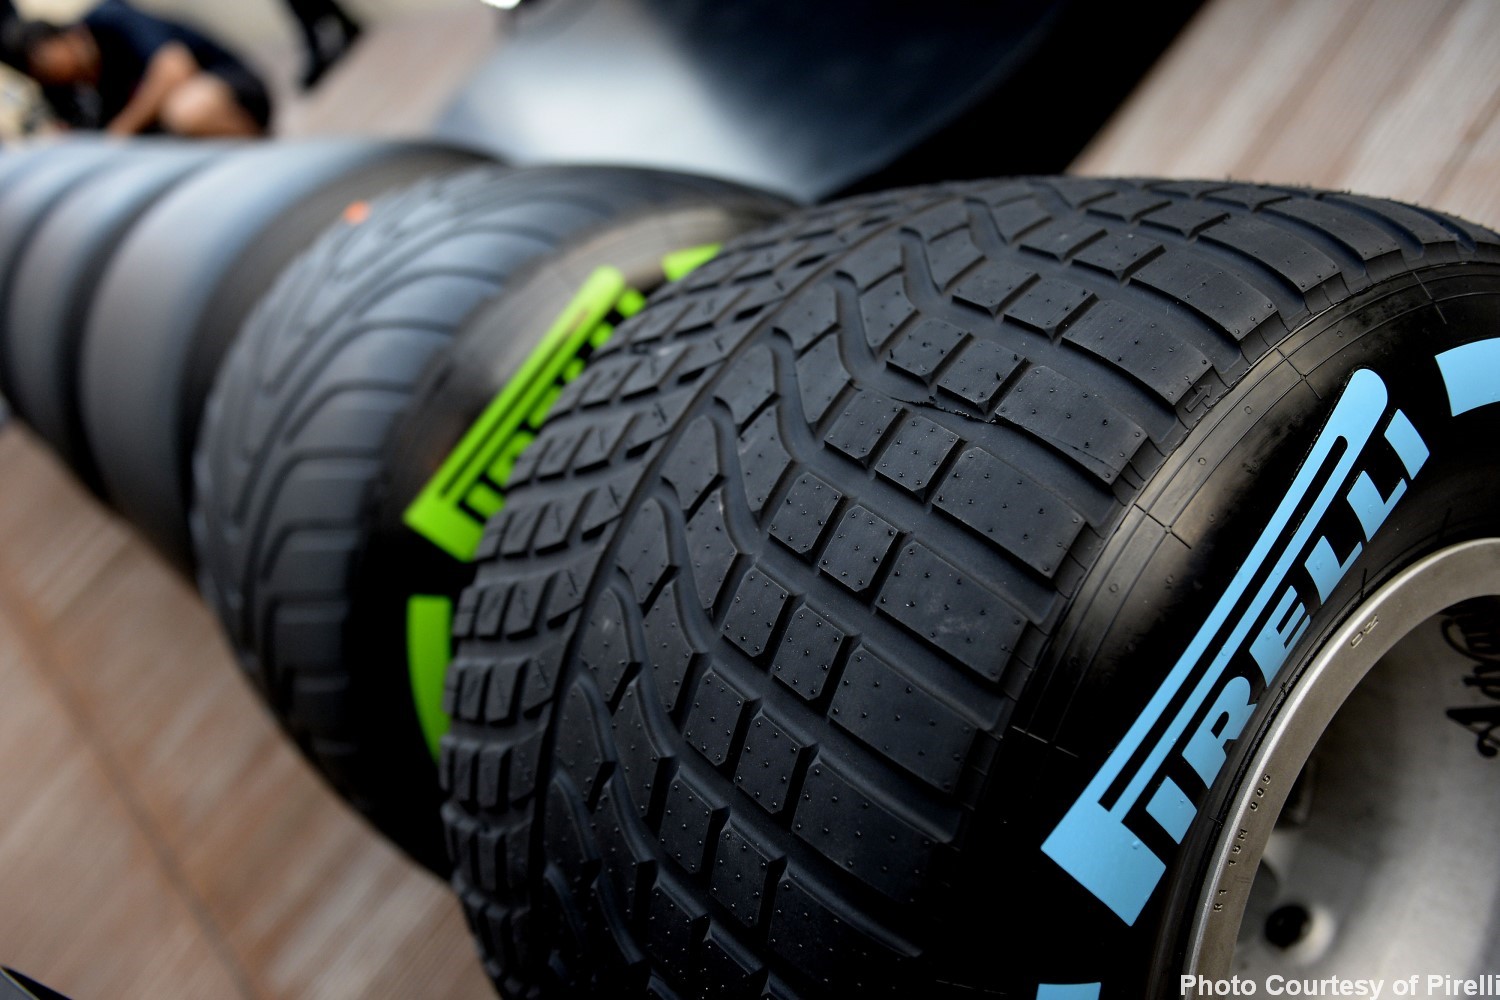 Pirelli wide tires, expected to ruin the show